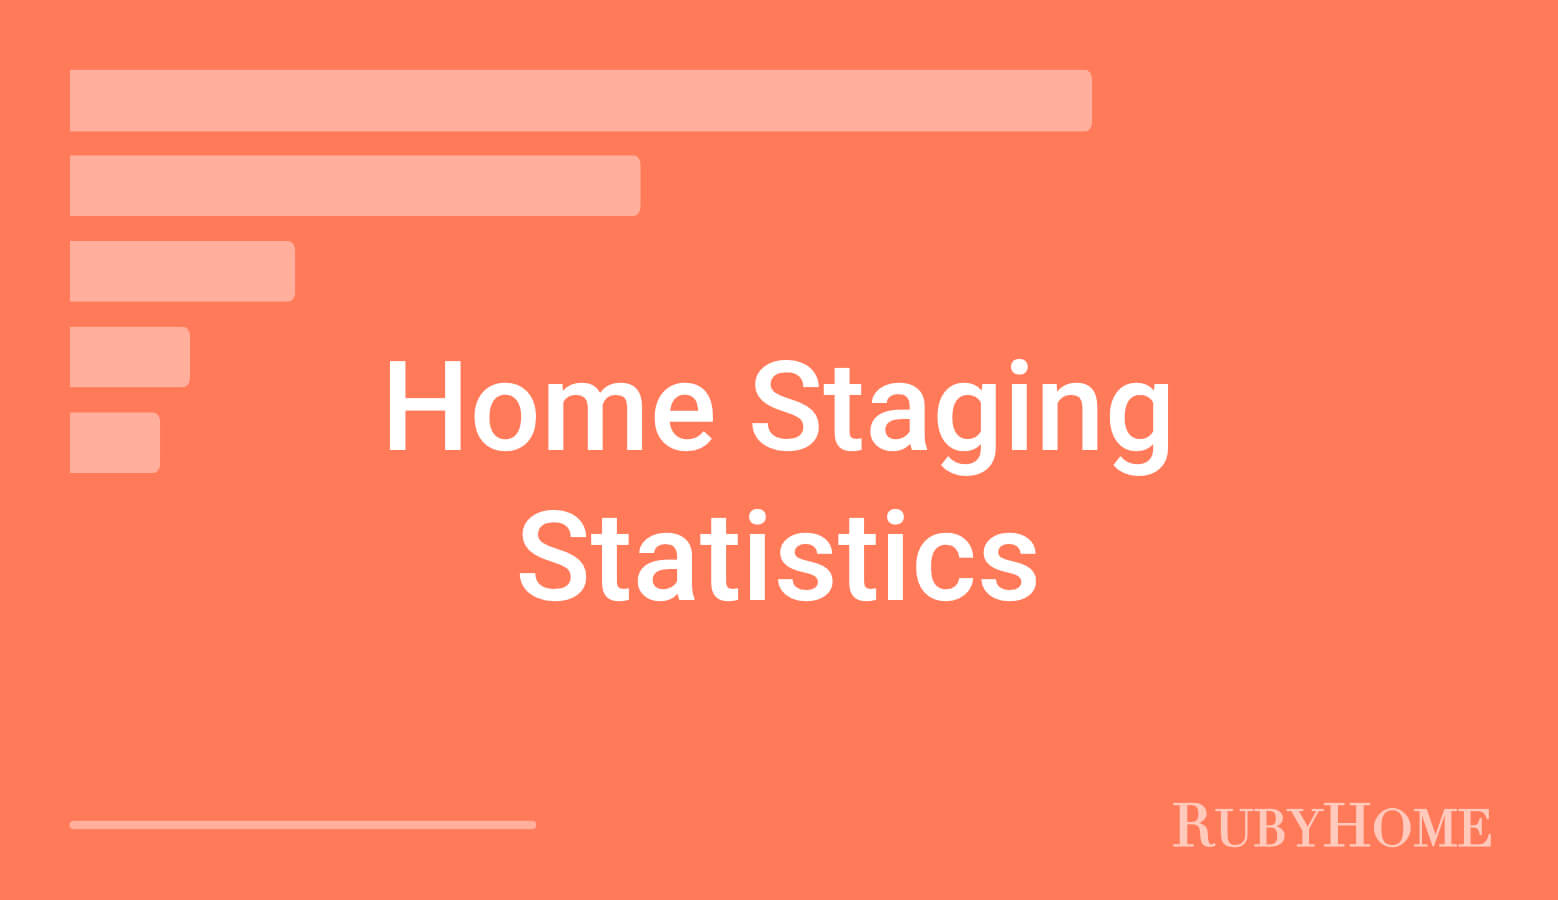 Home Staging Statistics